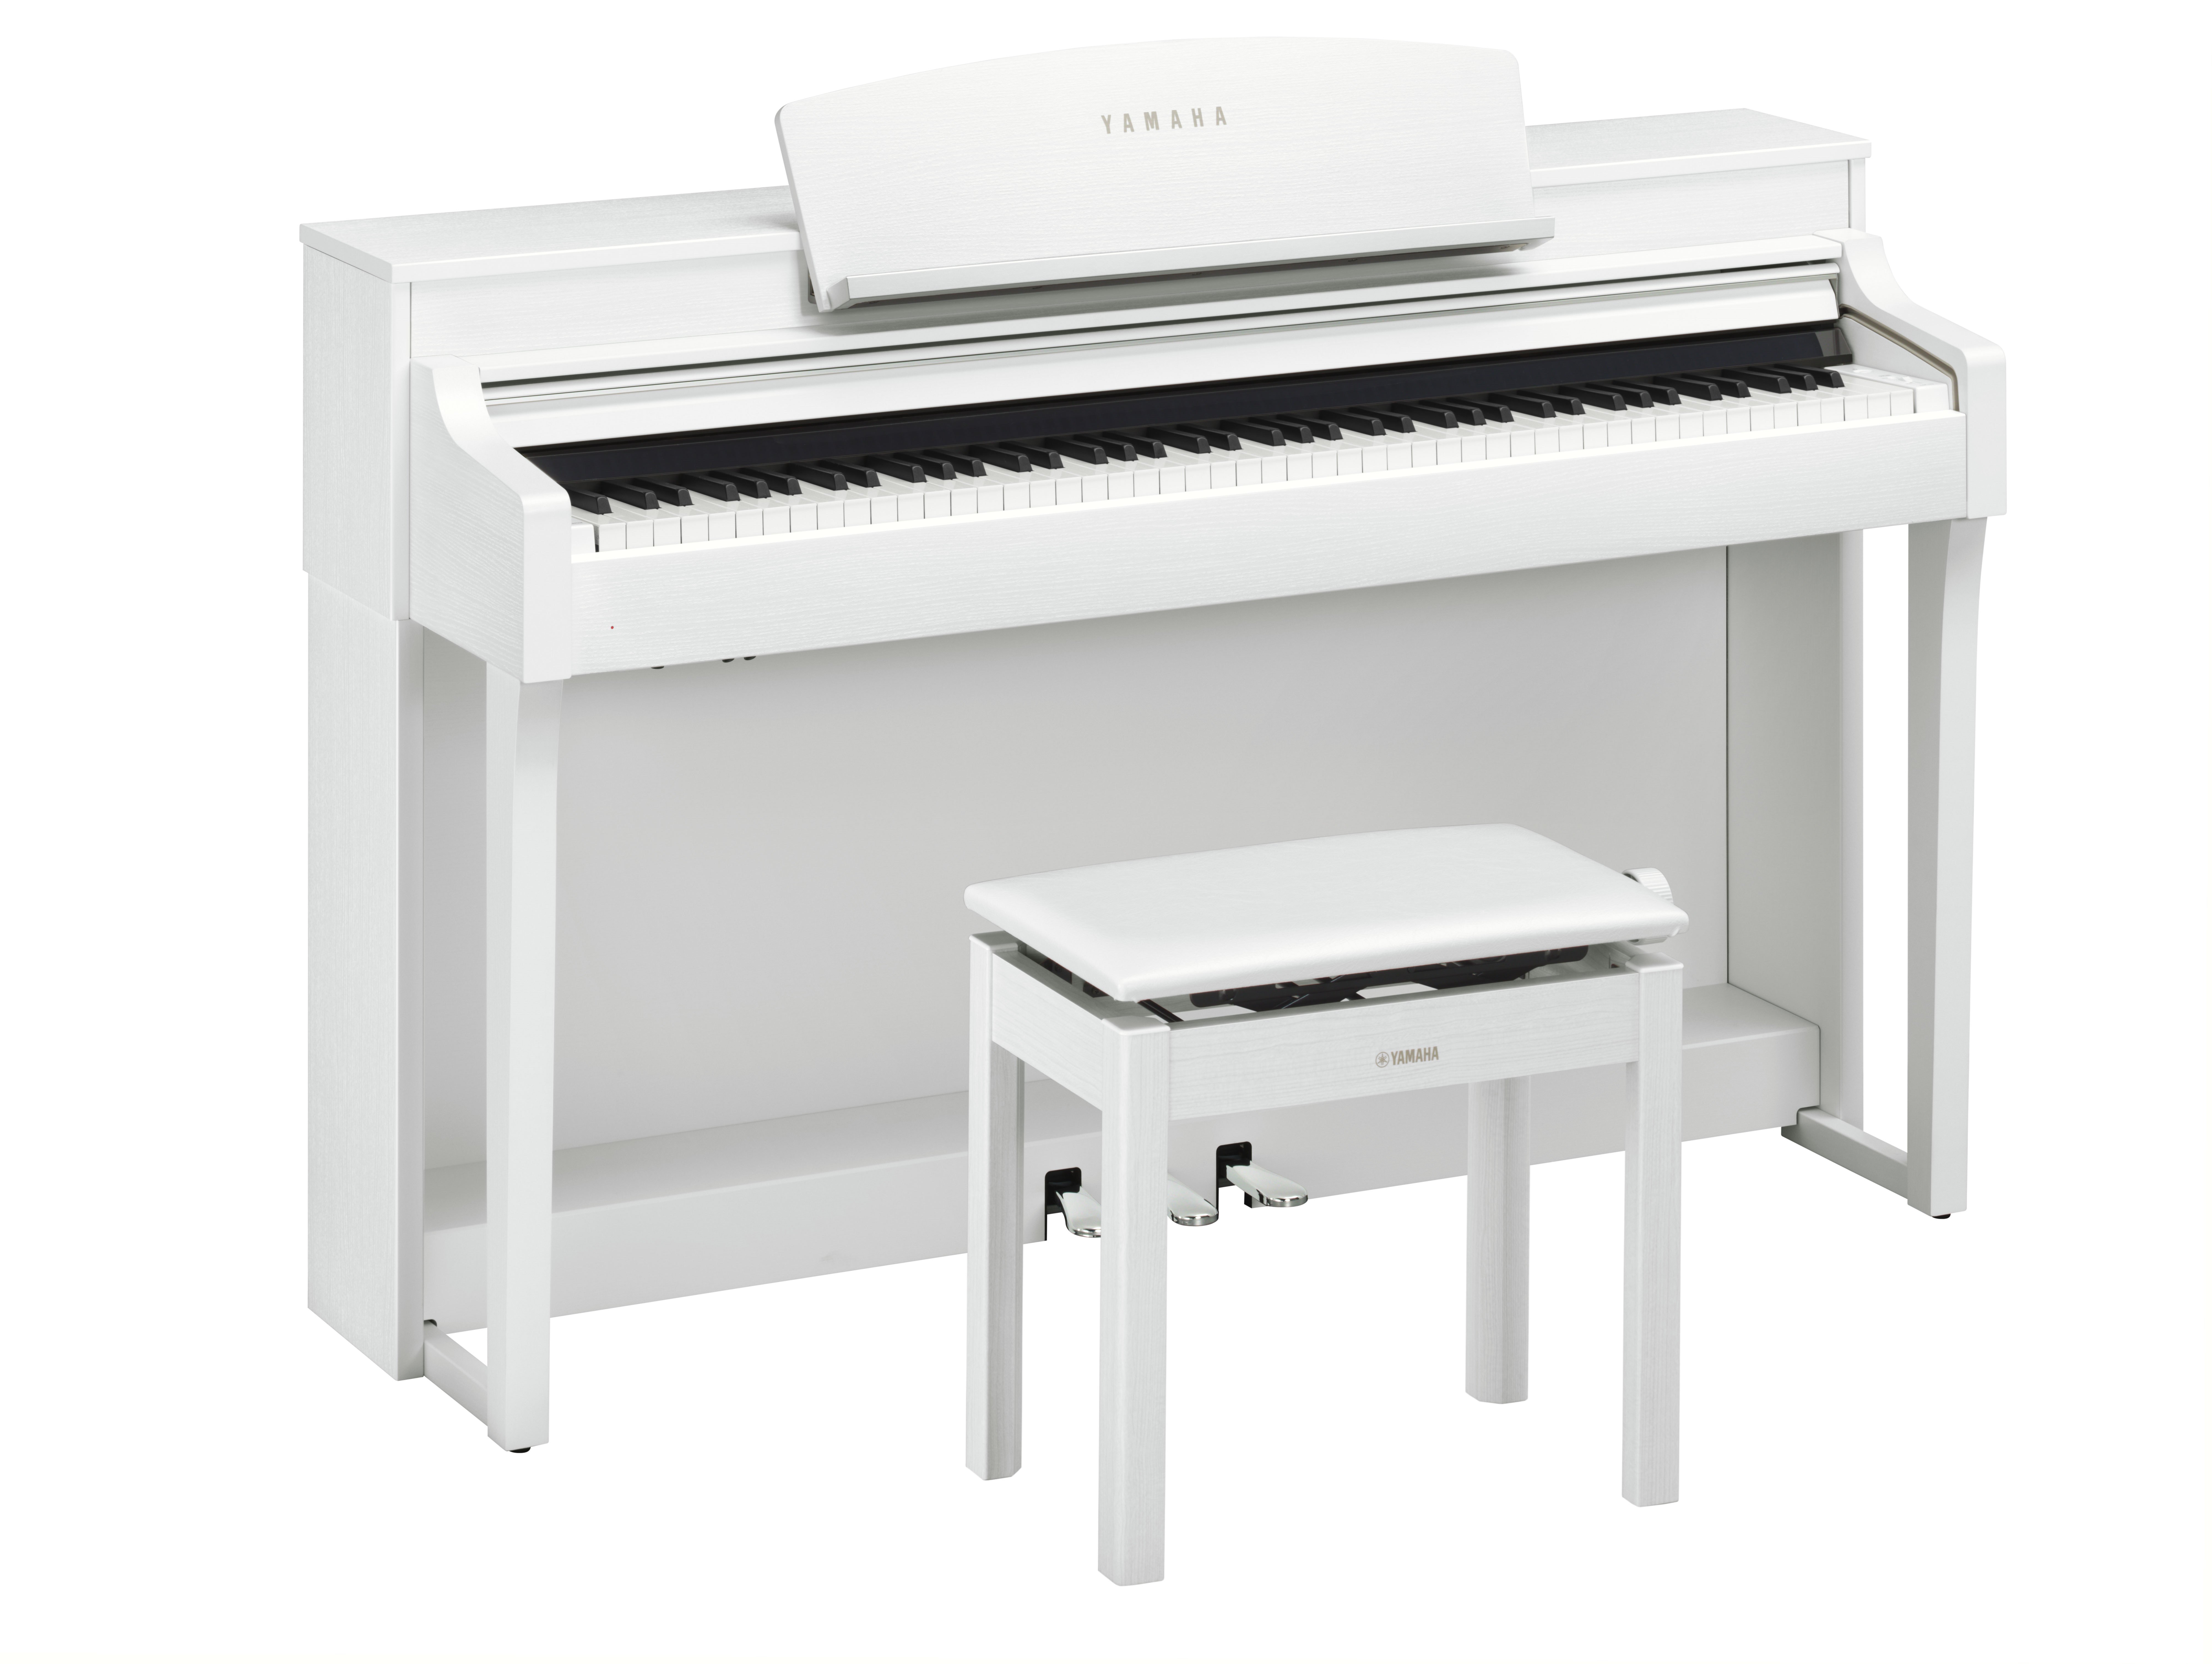 CSP-150 - Overview - Clavinova - Pianos - Musical Instruments - Products -  Yamaha - Other European Countries